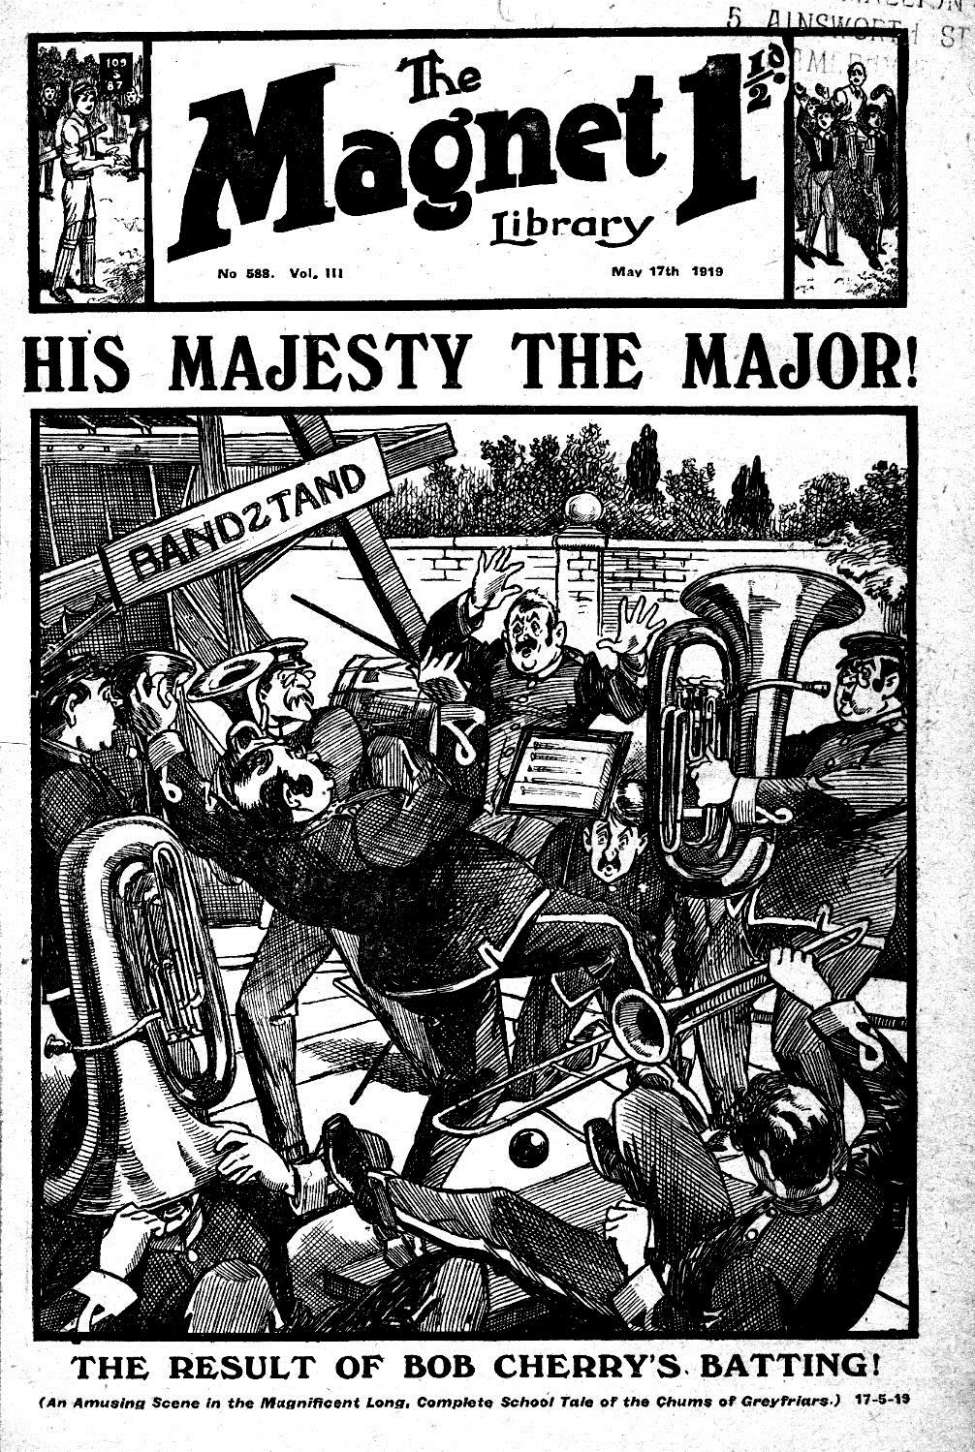 Book Cover For The Magnet 588 - His Majesty's the Major